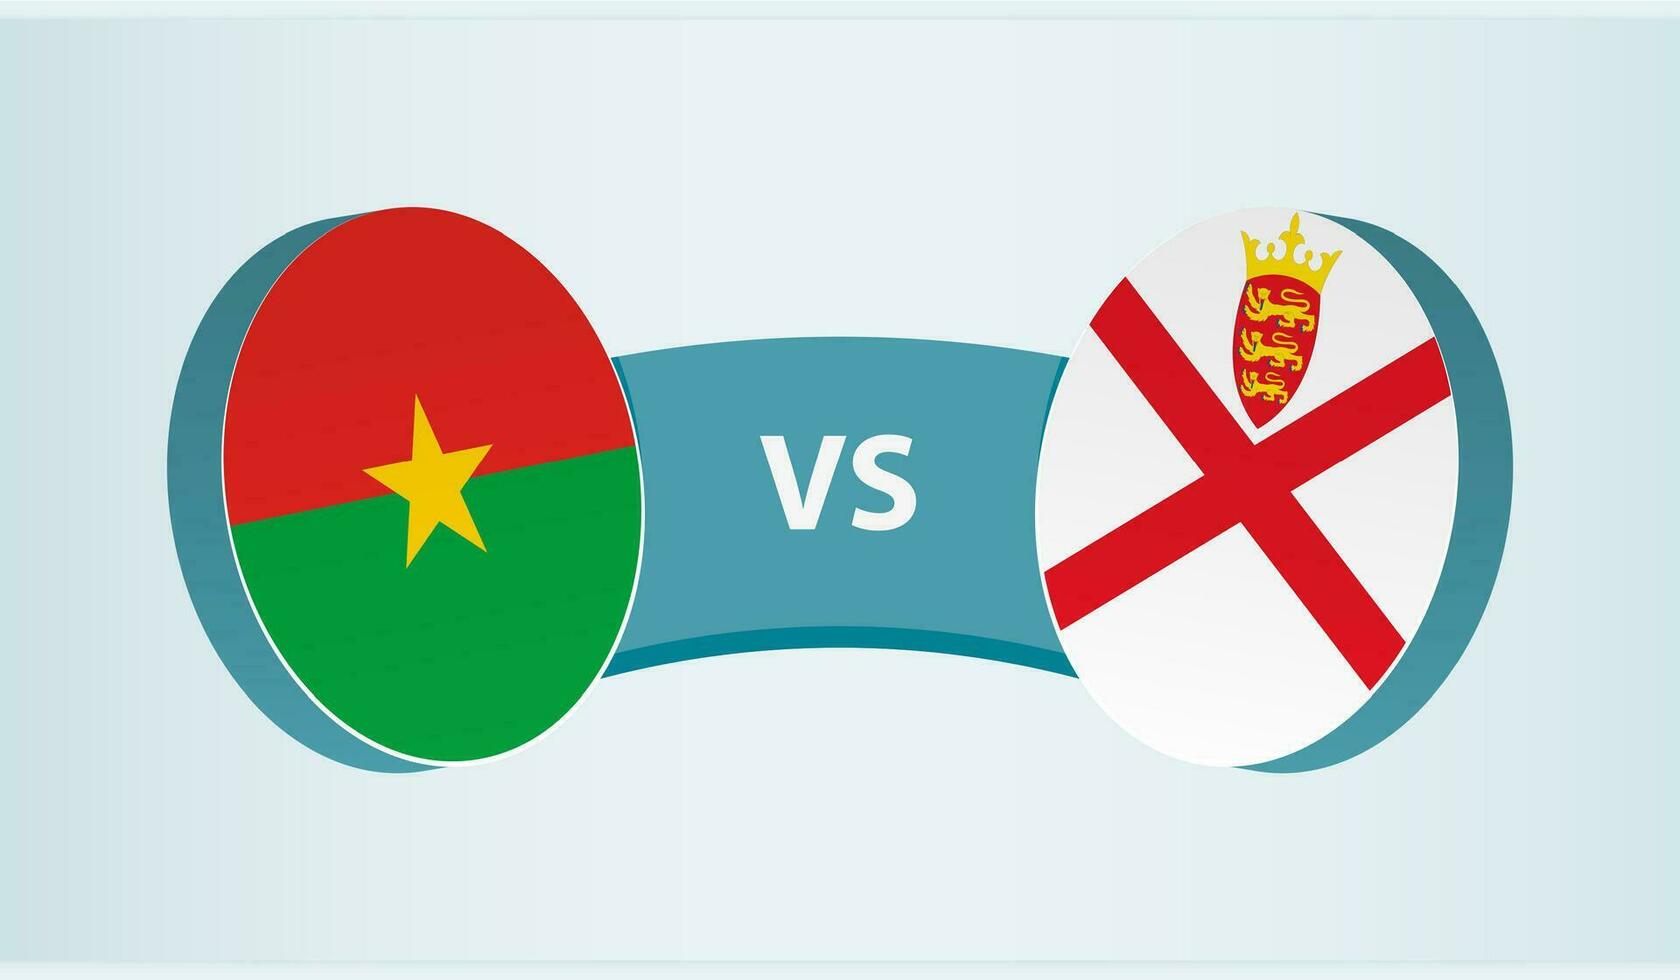 Burkina Faso versus Jersey, team sports competition concept. vector